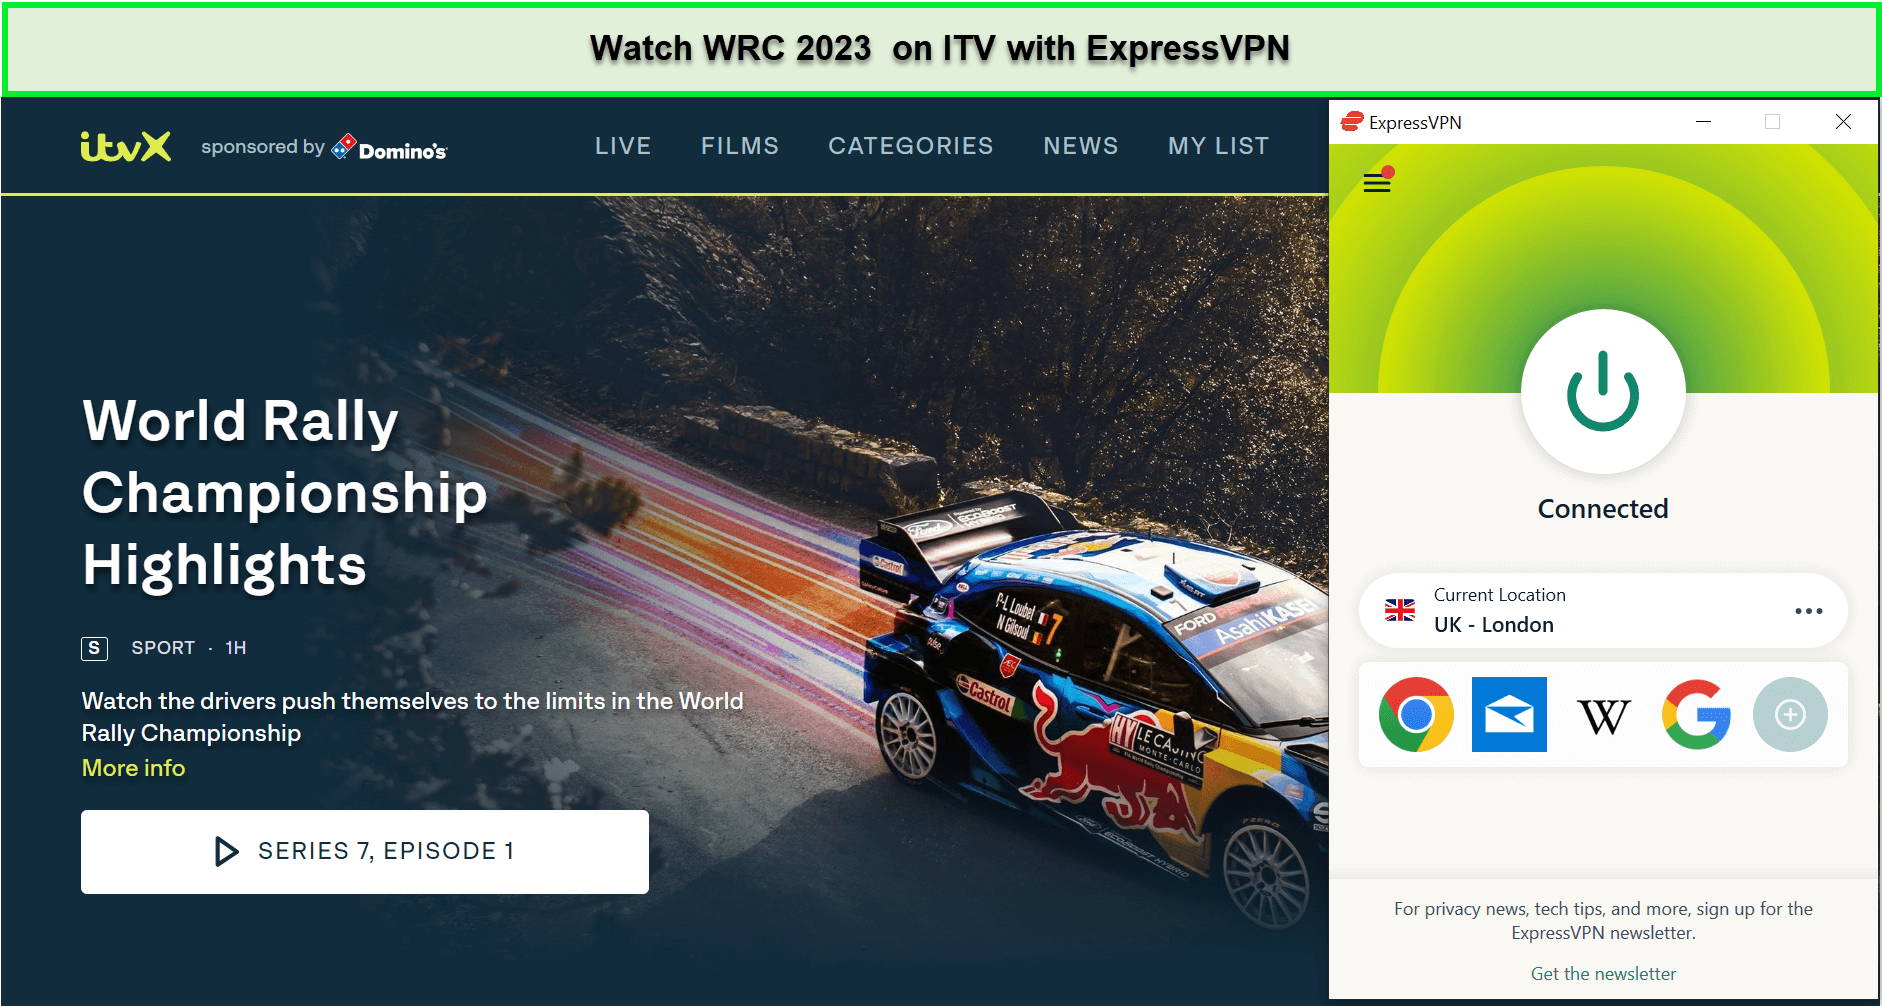 Watch-WRC-2023-in-Hong Kong-on-ITV-with-ExpressVPN